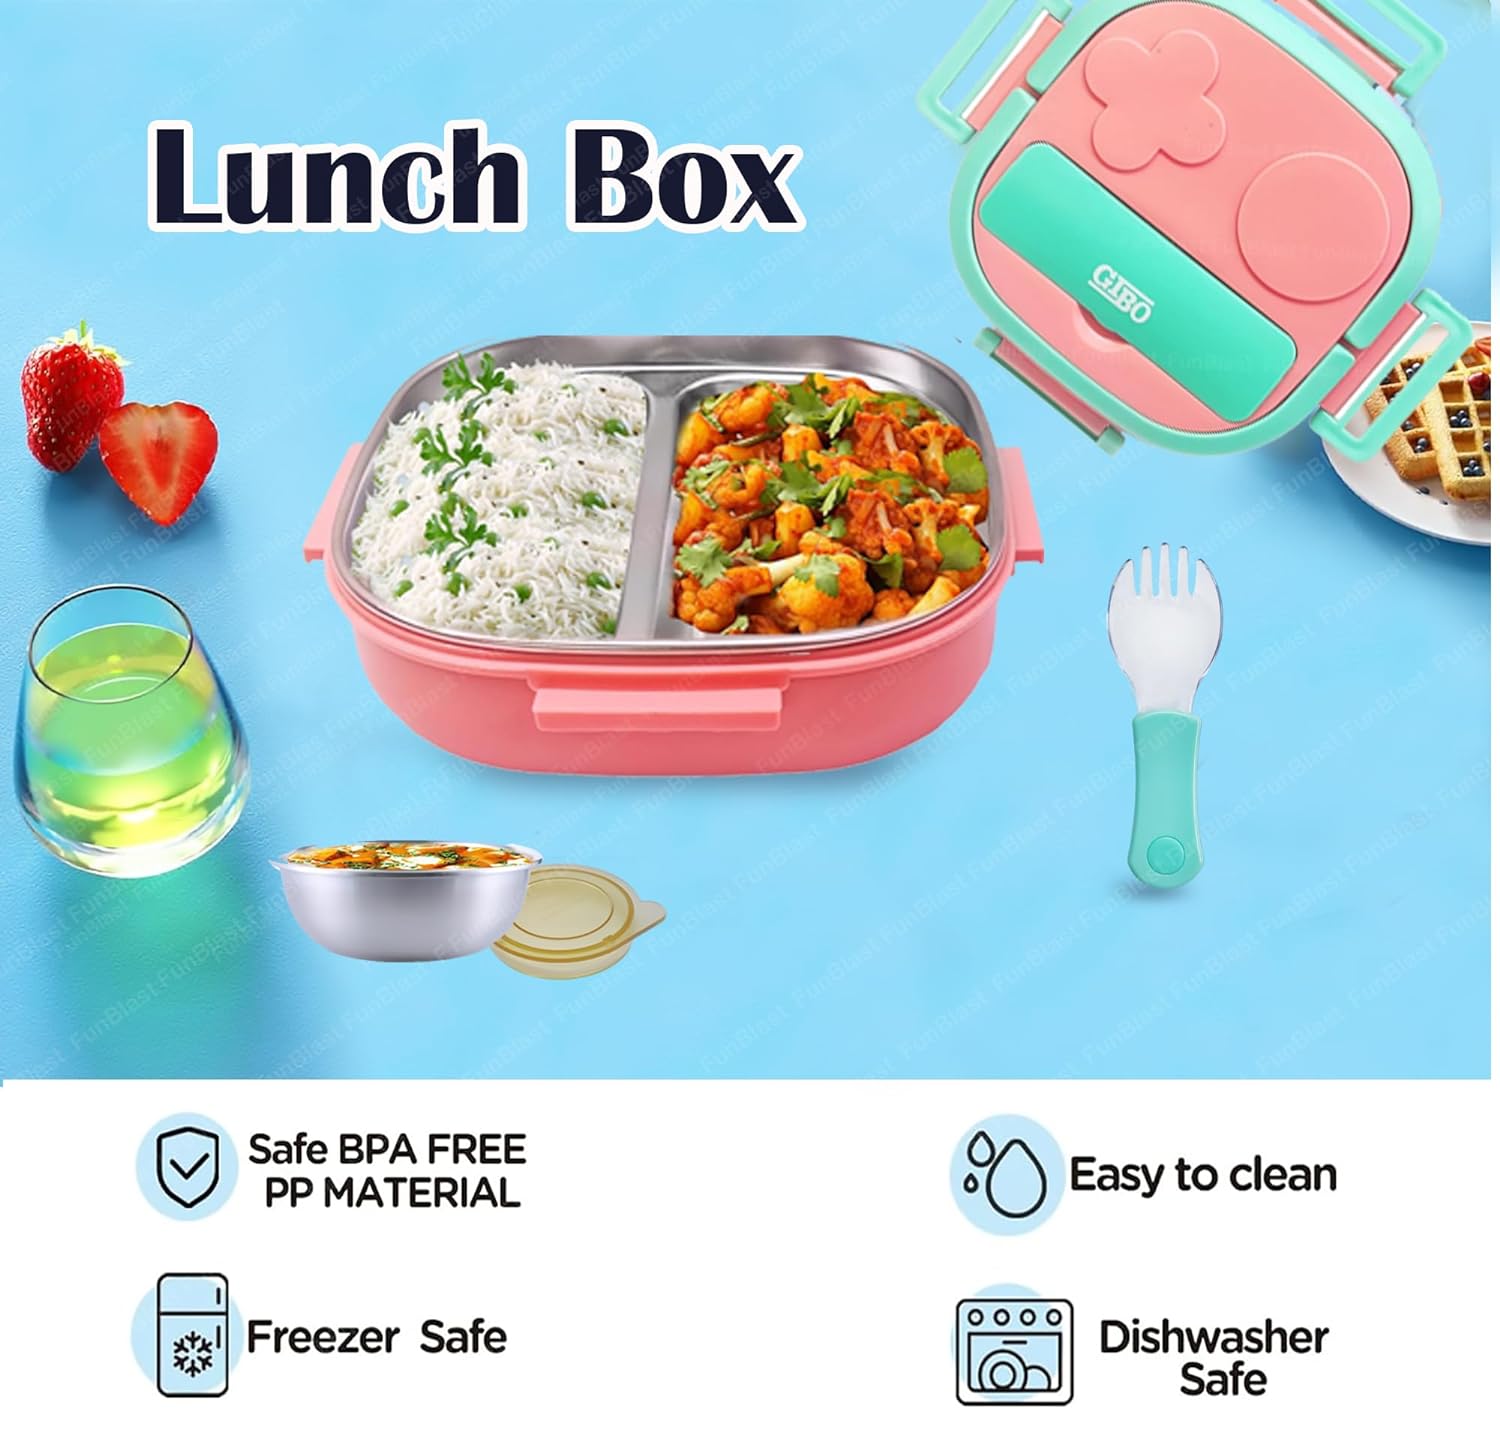 Lunch Box for School Kids, Compartment Lunch Box with Stainless Steel Inner Case, SUS304 Lunch Box for Kids (850 ML)